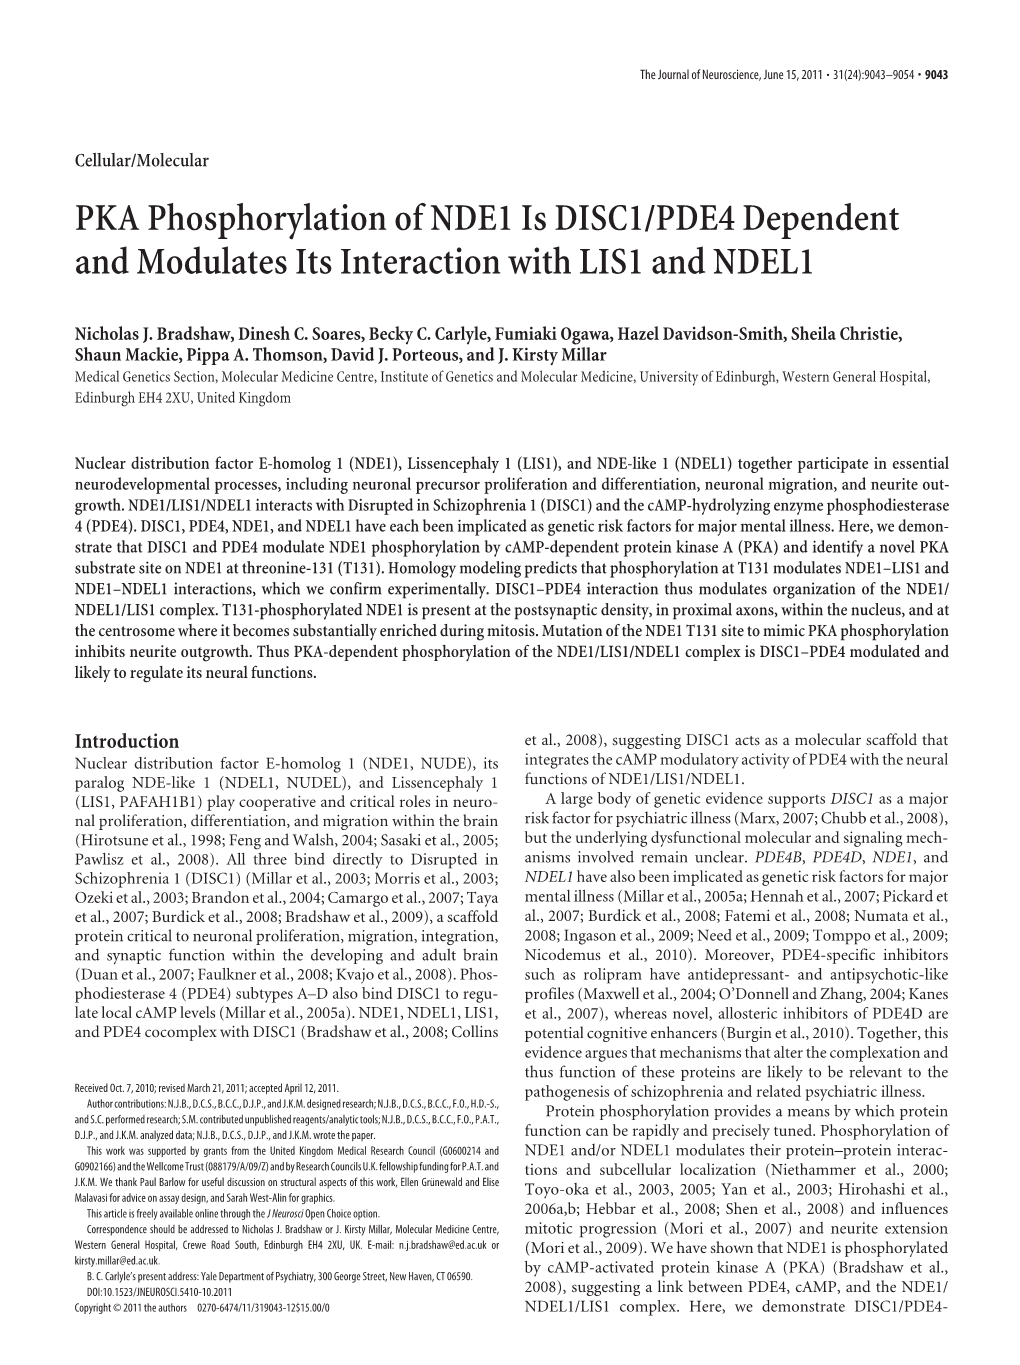 PKA Phosphorylation of NDE1 Is DISC1/PDE4 Dependent and Modulates Its Interaction with LIS1 and NDEL1